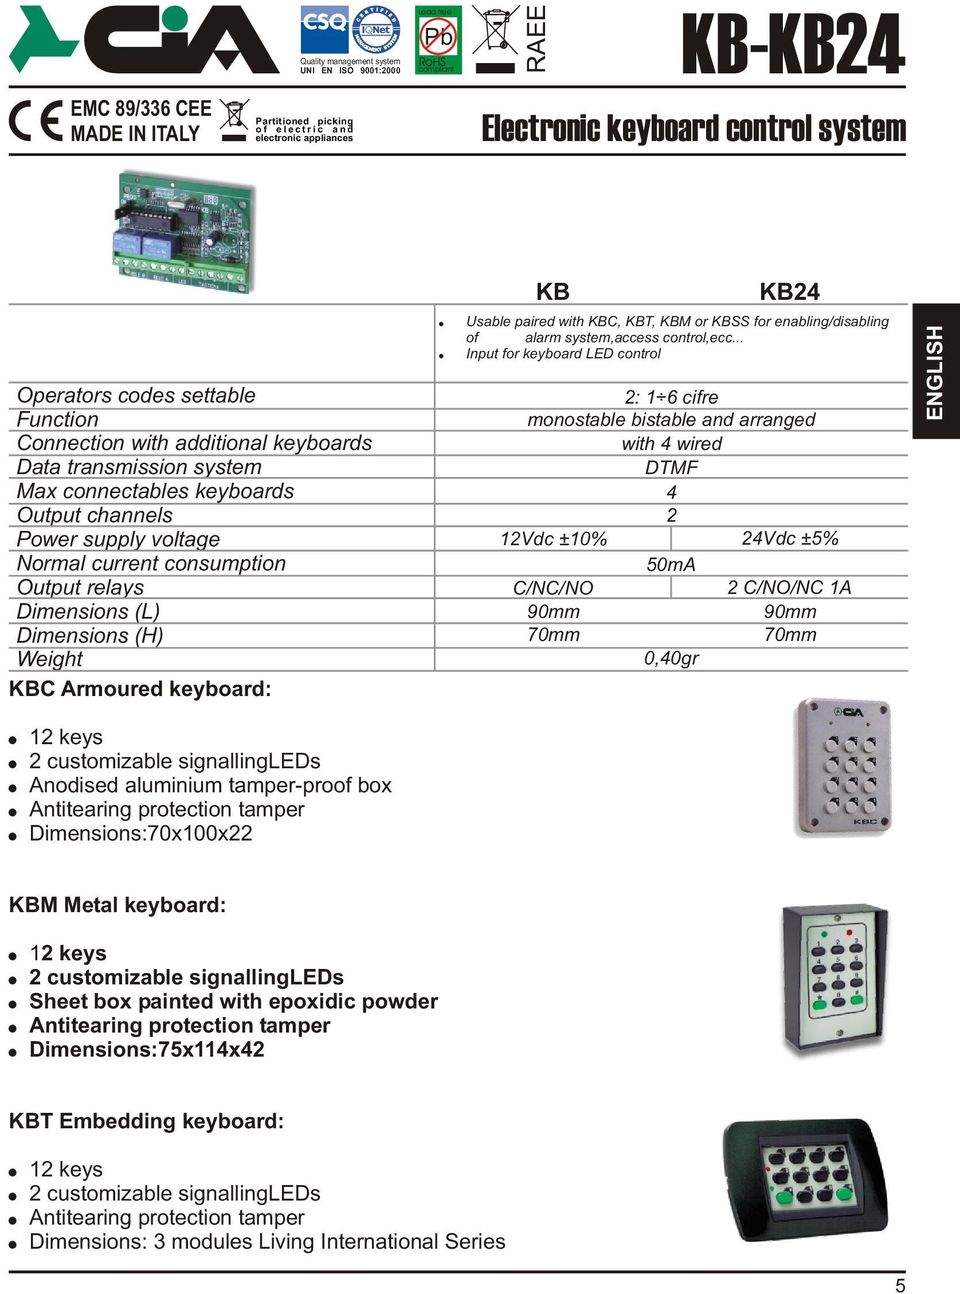 Output relays Dimensions (L) Dimensions (H) Weight C Armoured keyboard: Usable paired with C, T, M or SS for enabling/disabling of alarm system,access control,ecc.